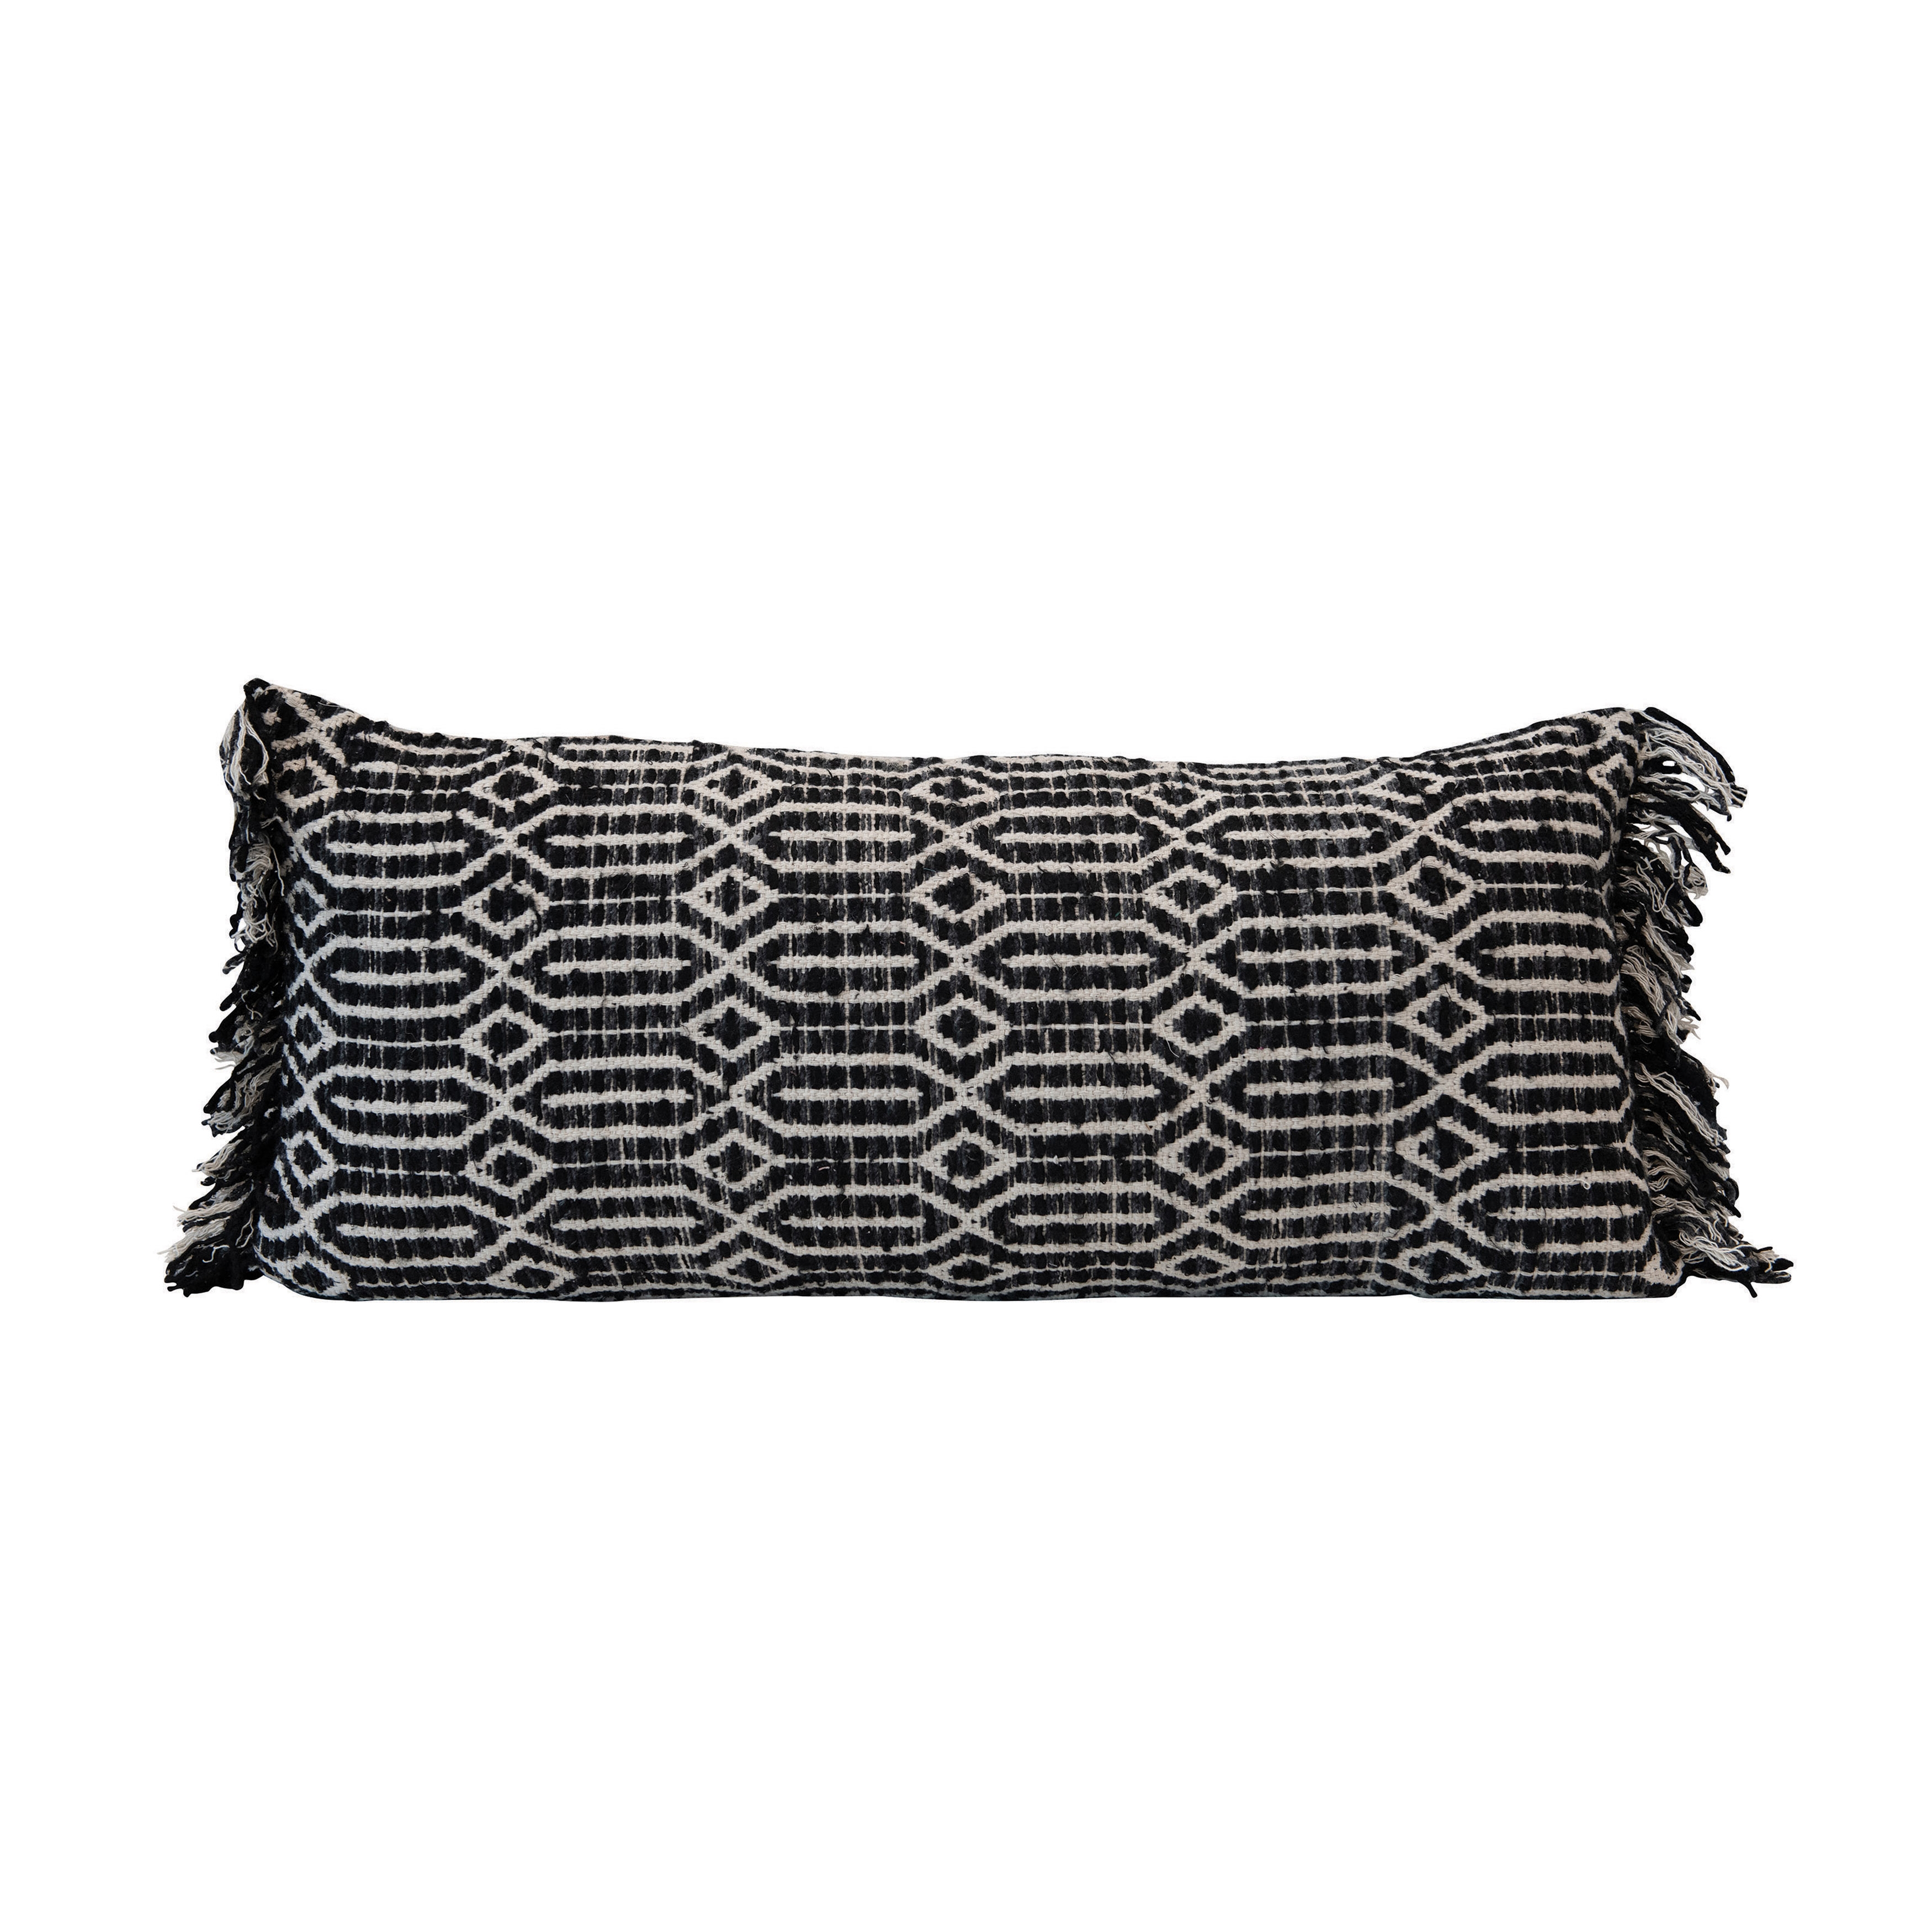 Woven Cotton Lumbar Pillow with Abstract Pattern, Black & White - Image 0